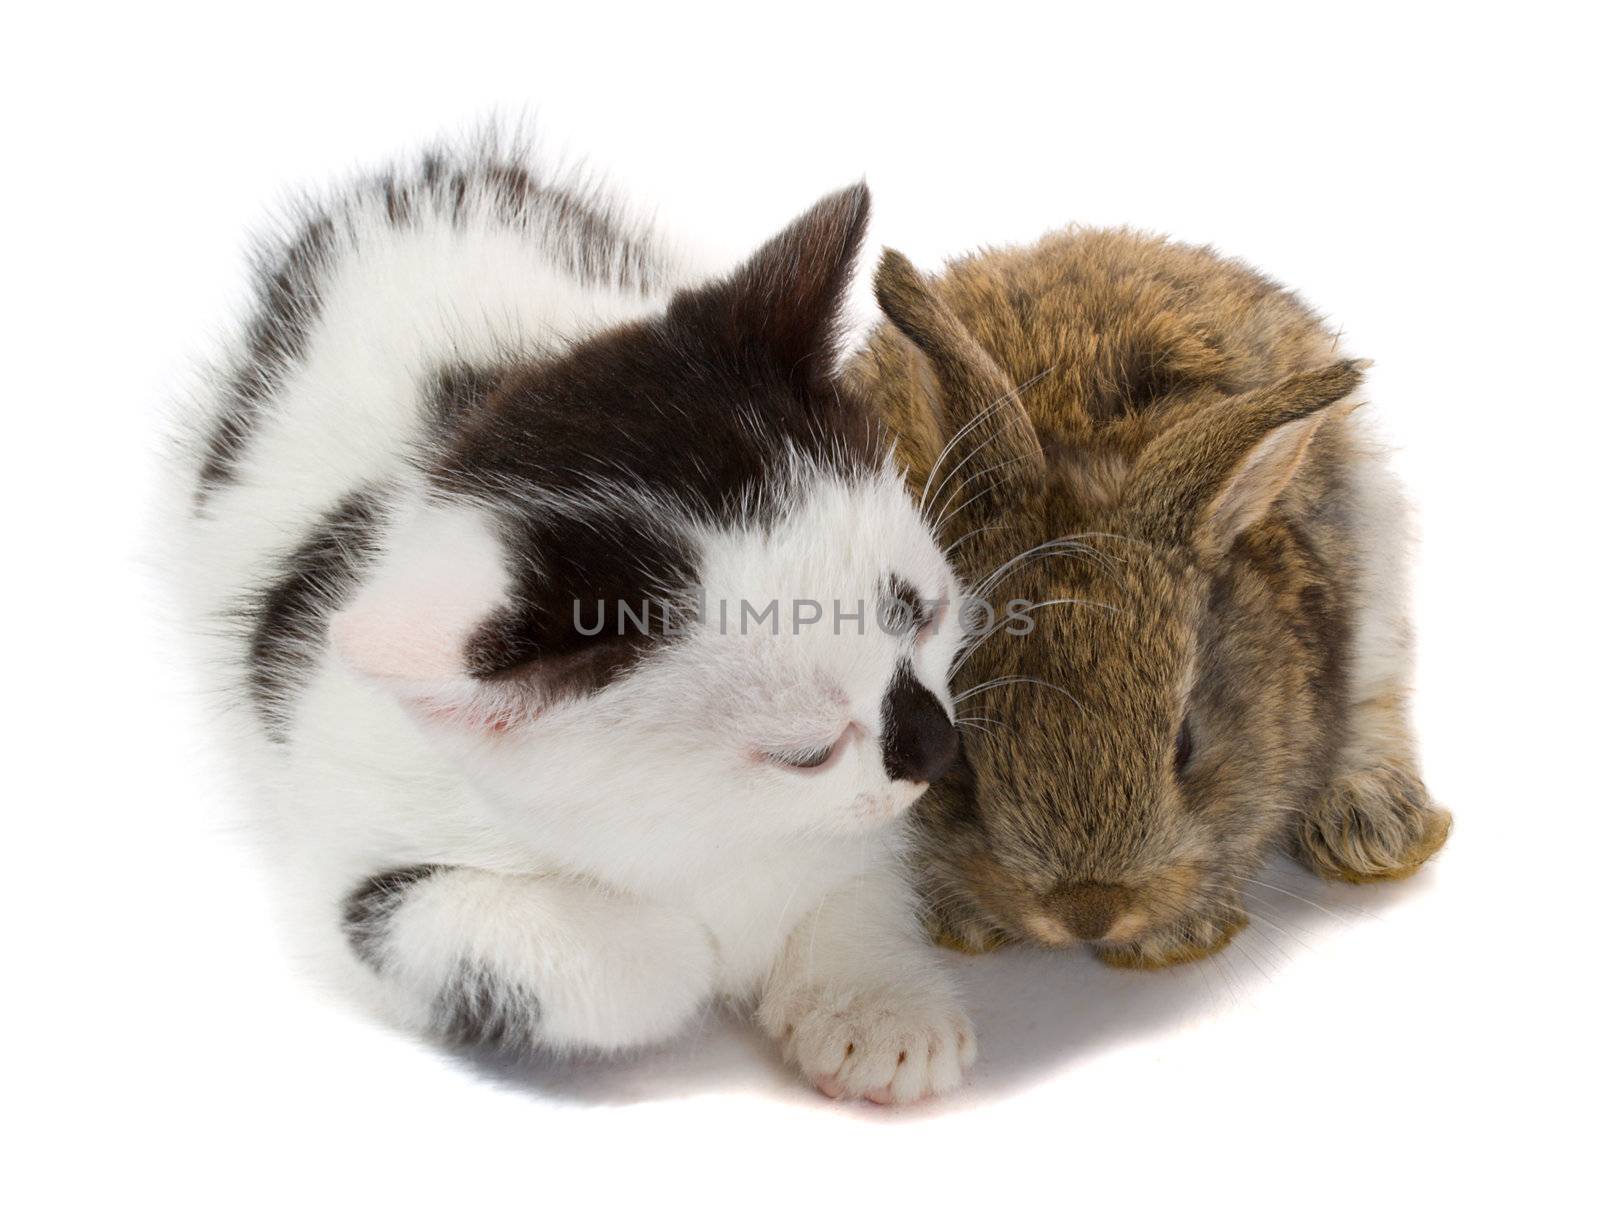 kitten and baby rabbit by Alekcey